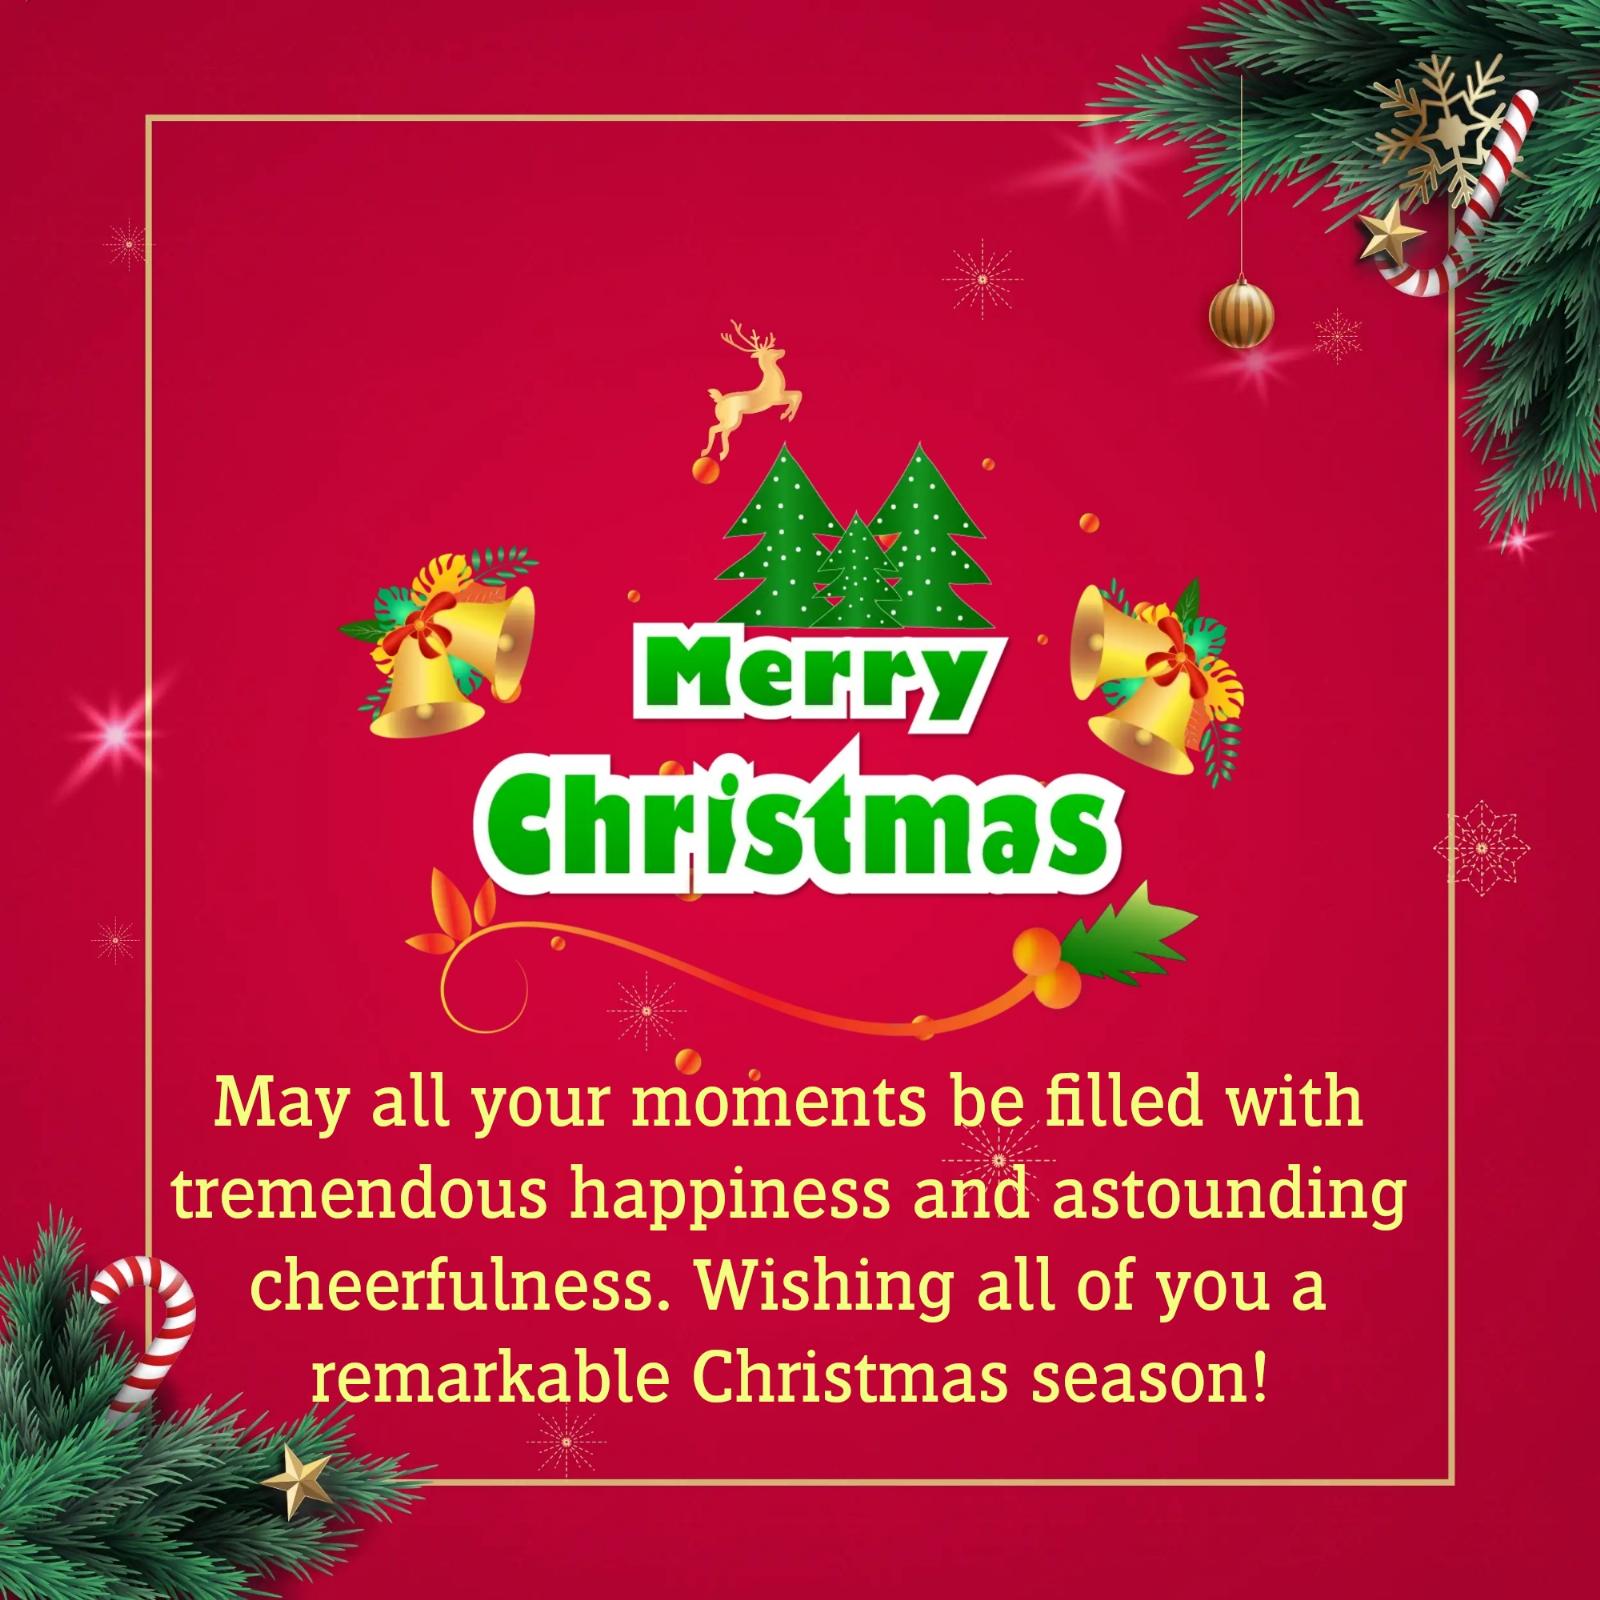 May all your moments be filled with tremendous happiness